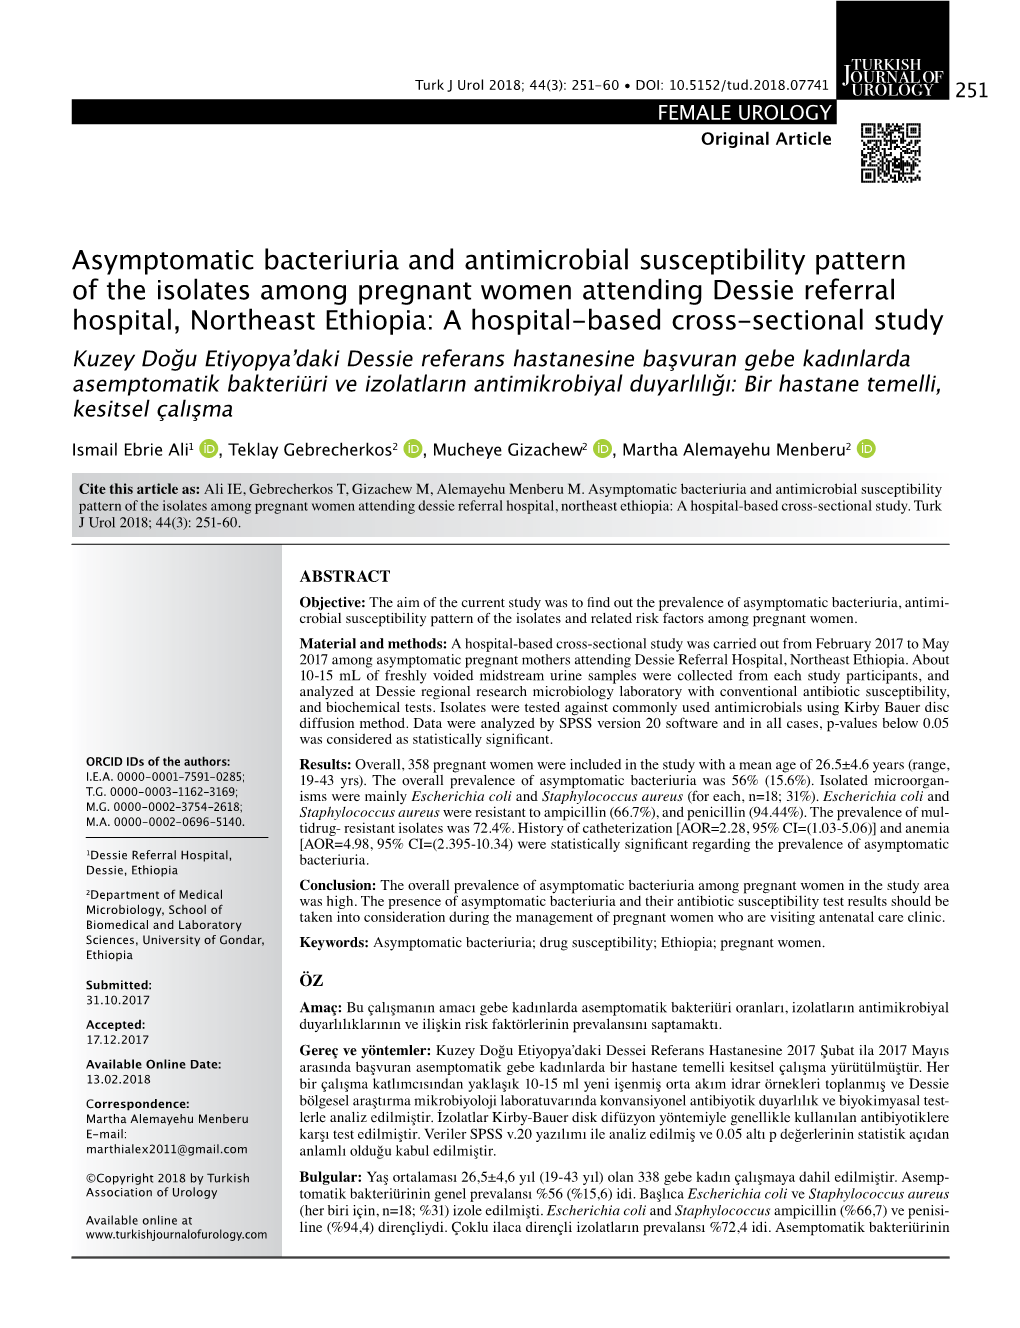 Asymptomatic Bacteriuria and Antimicrobial Susceptibility Pattern of the Isolates Among Pregnant Women Attending Dessie Referral